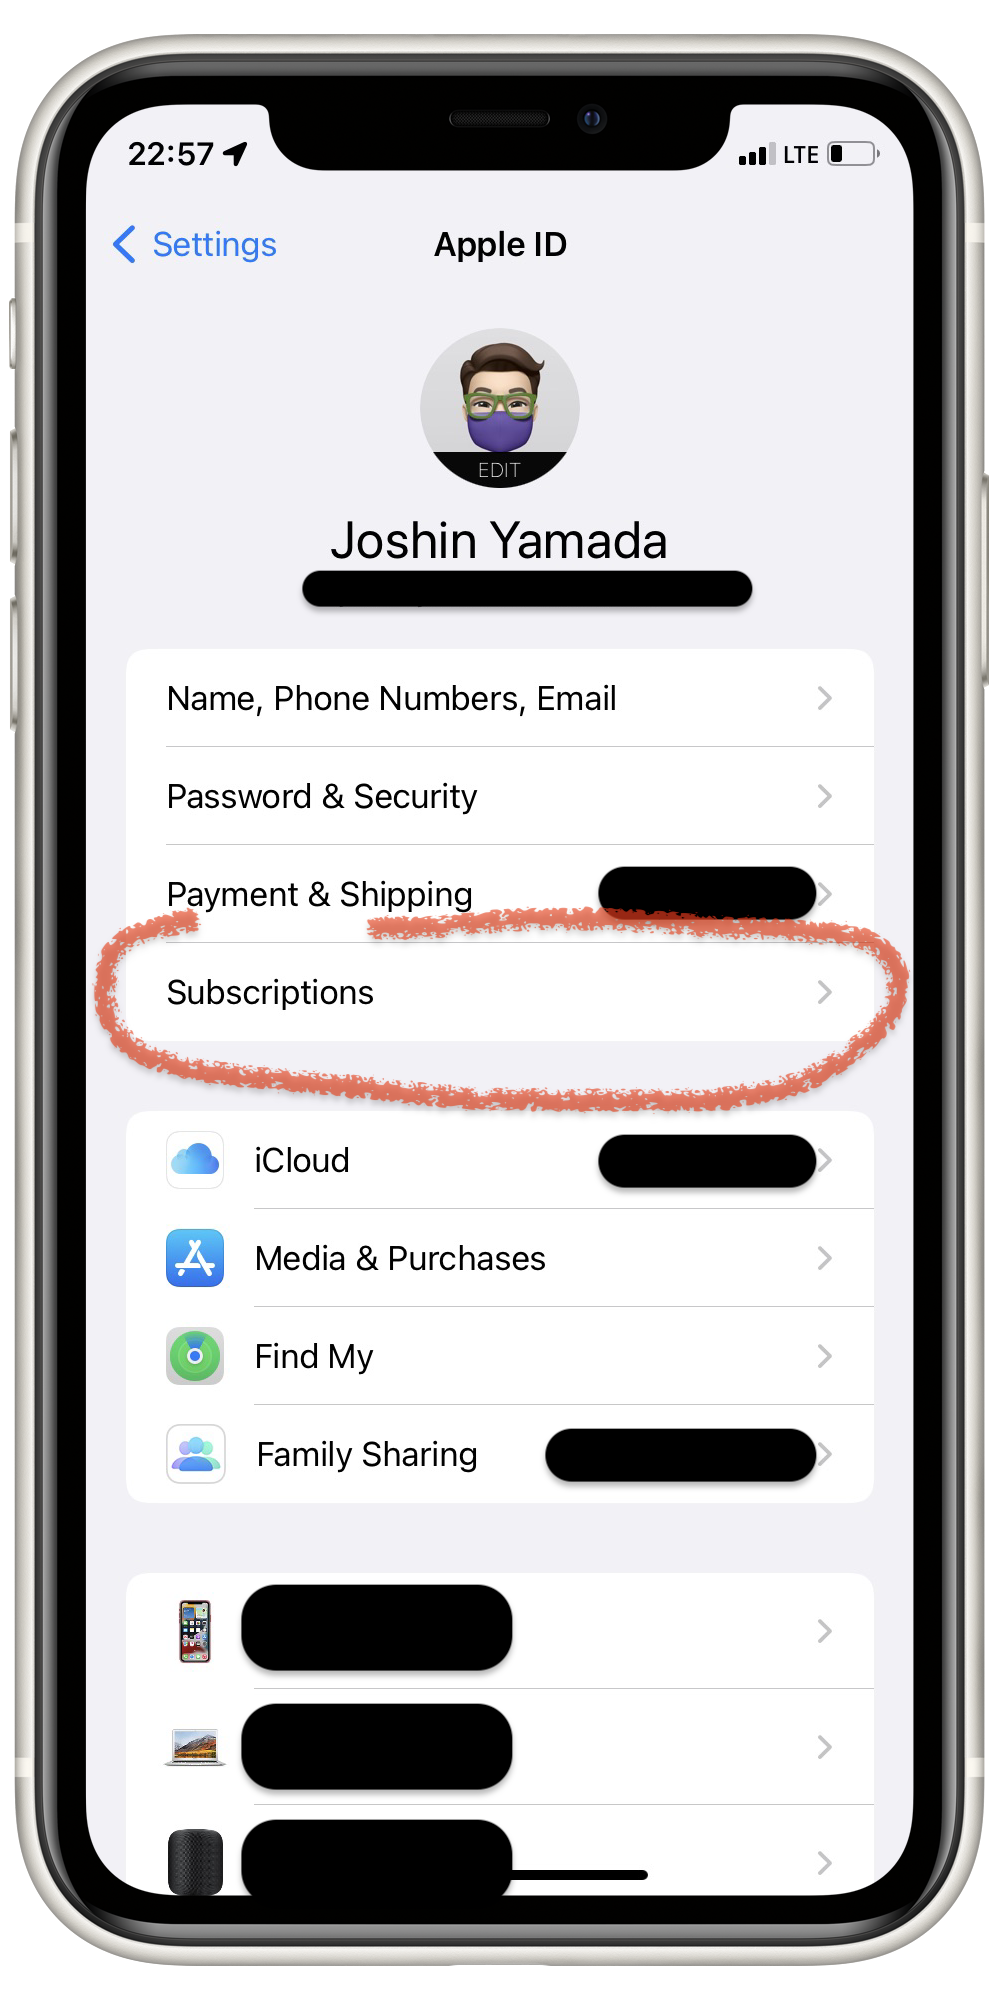 The AppleID/iCloud settings page showing Subscriptions, the fourth button, being highlighted.